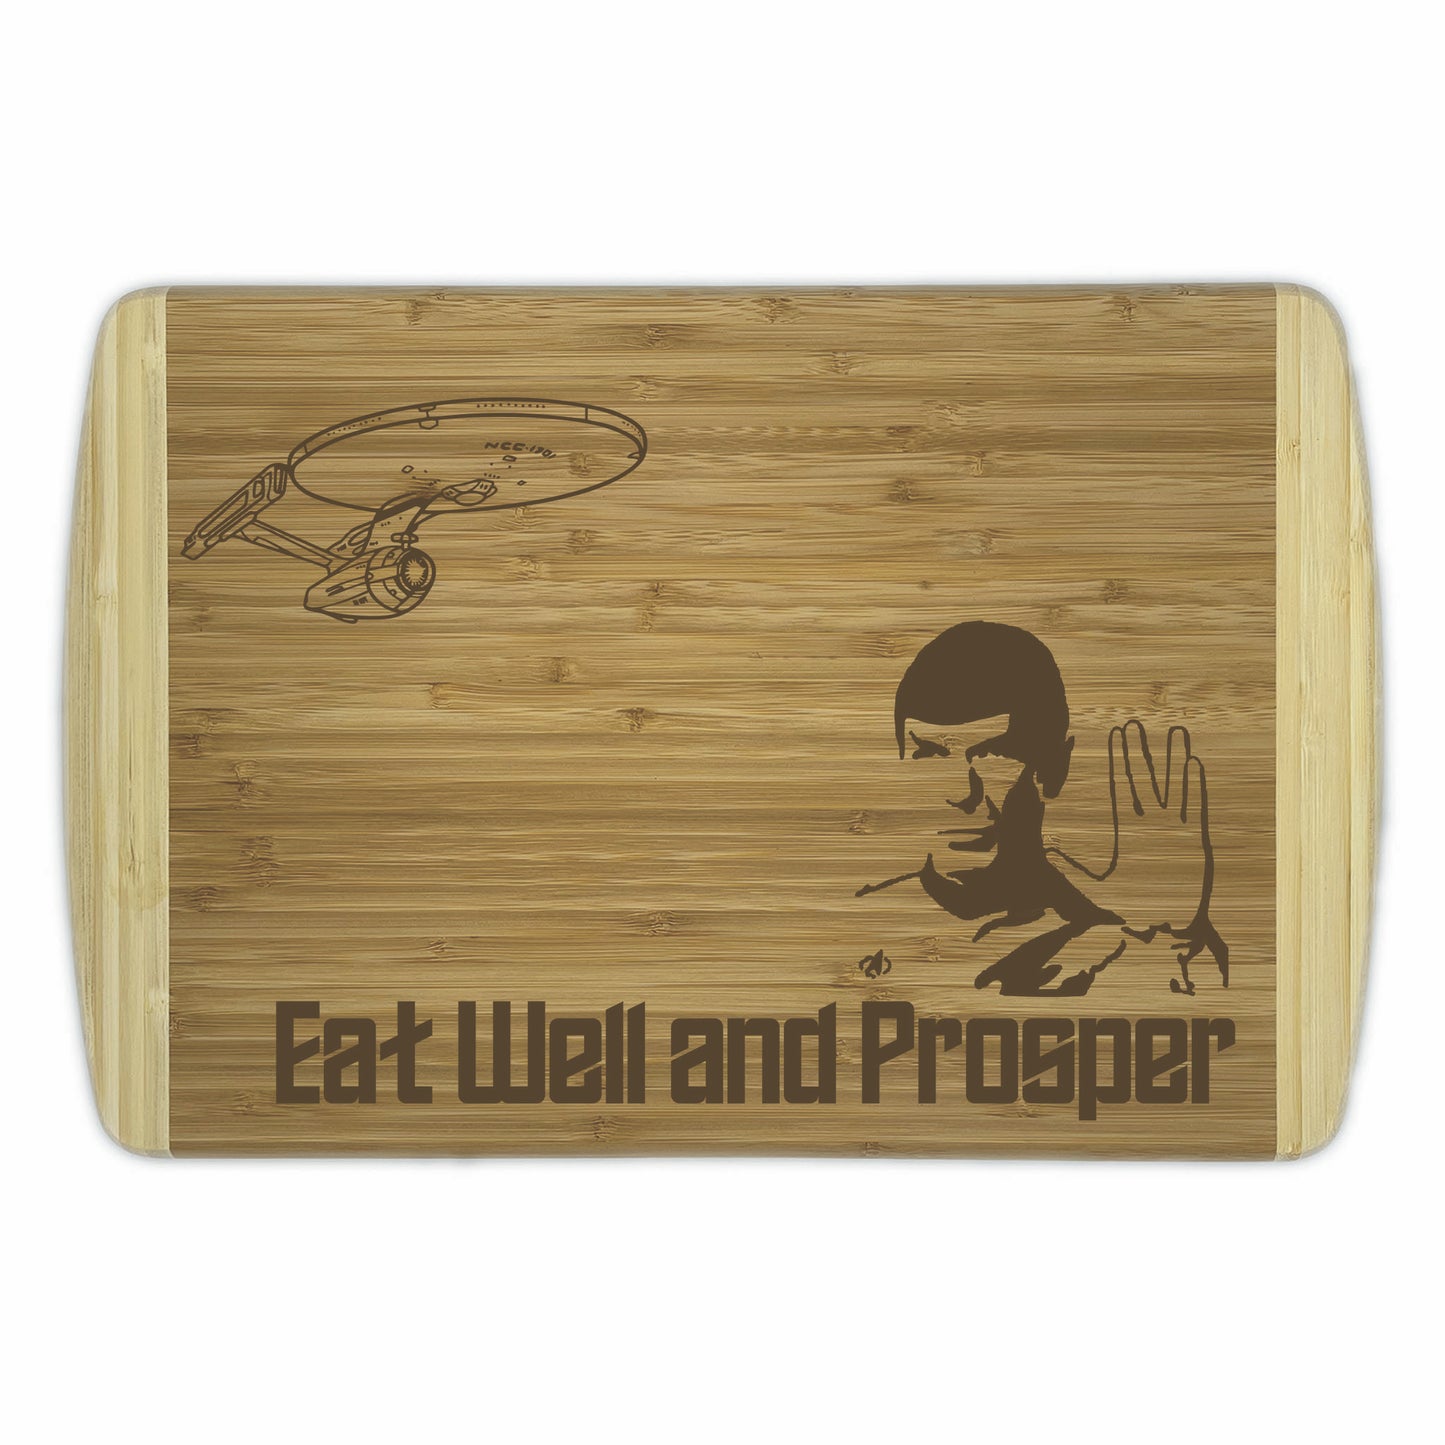 Star Trek Bamboo Cutting Boards | Spock | Eat Well and Prosper Wood Cutting Boards | Different Styles Available